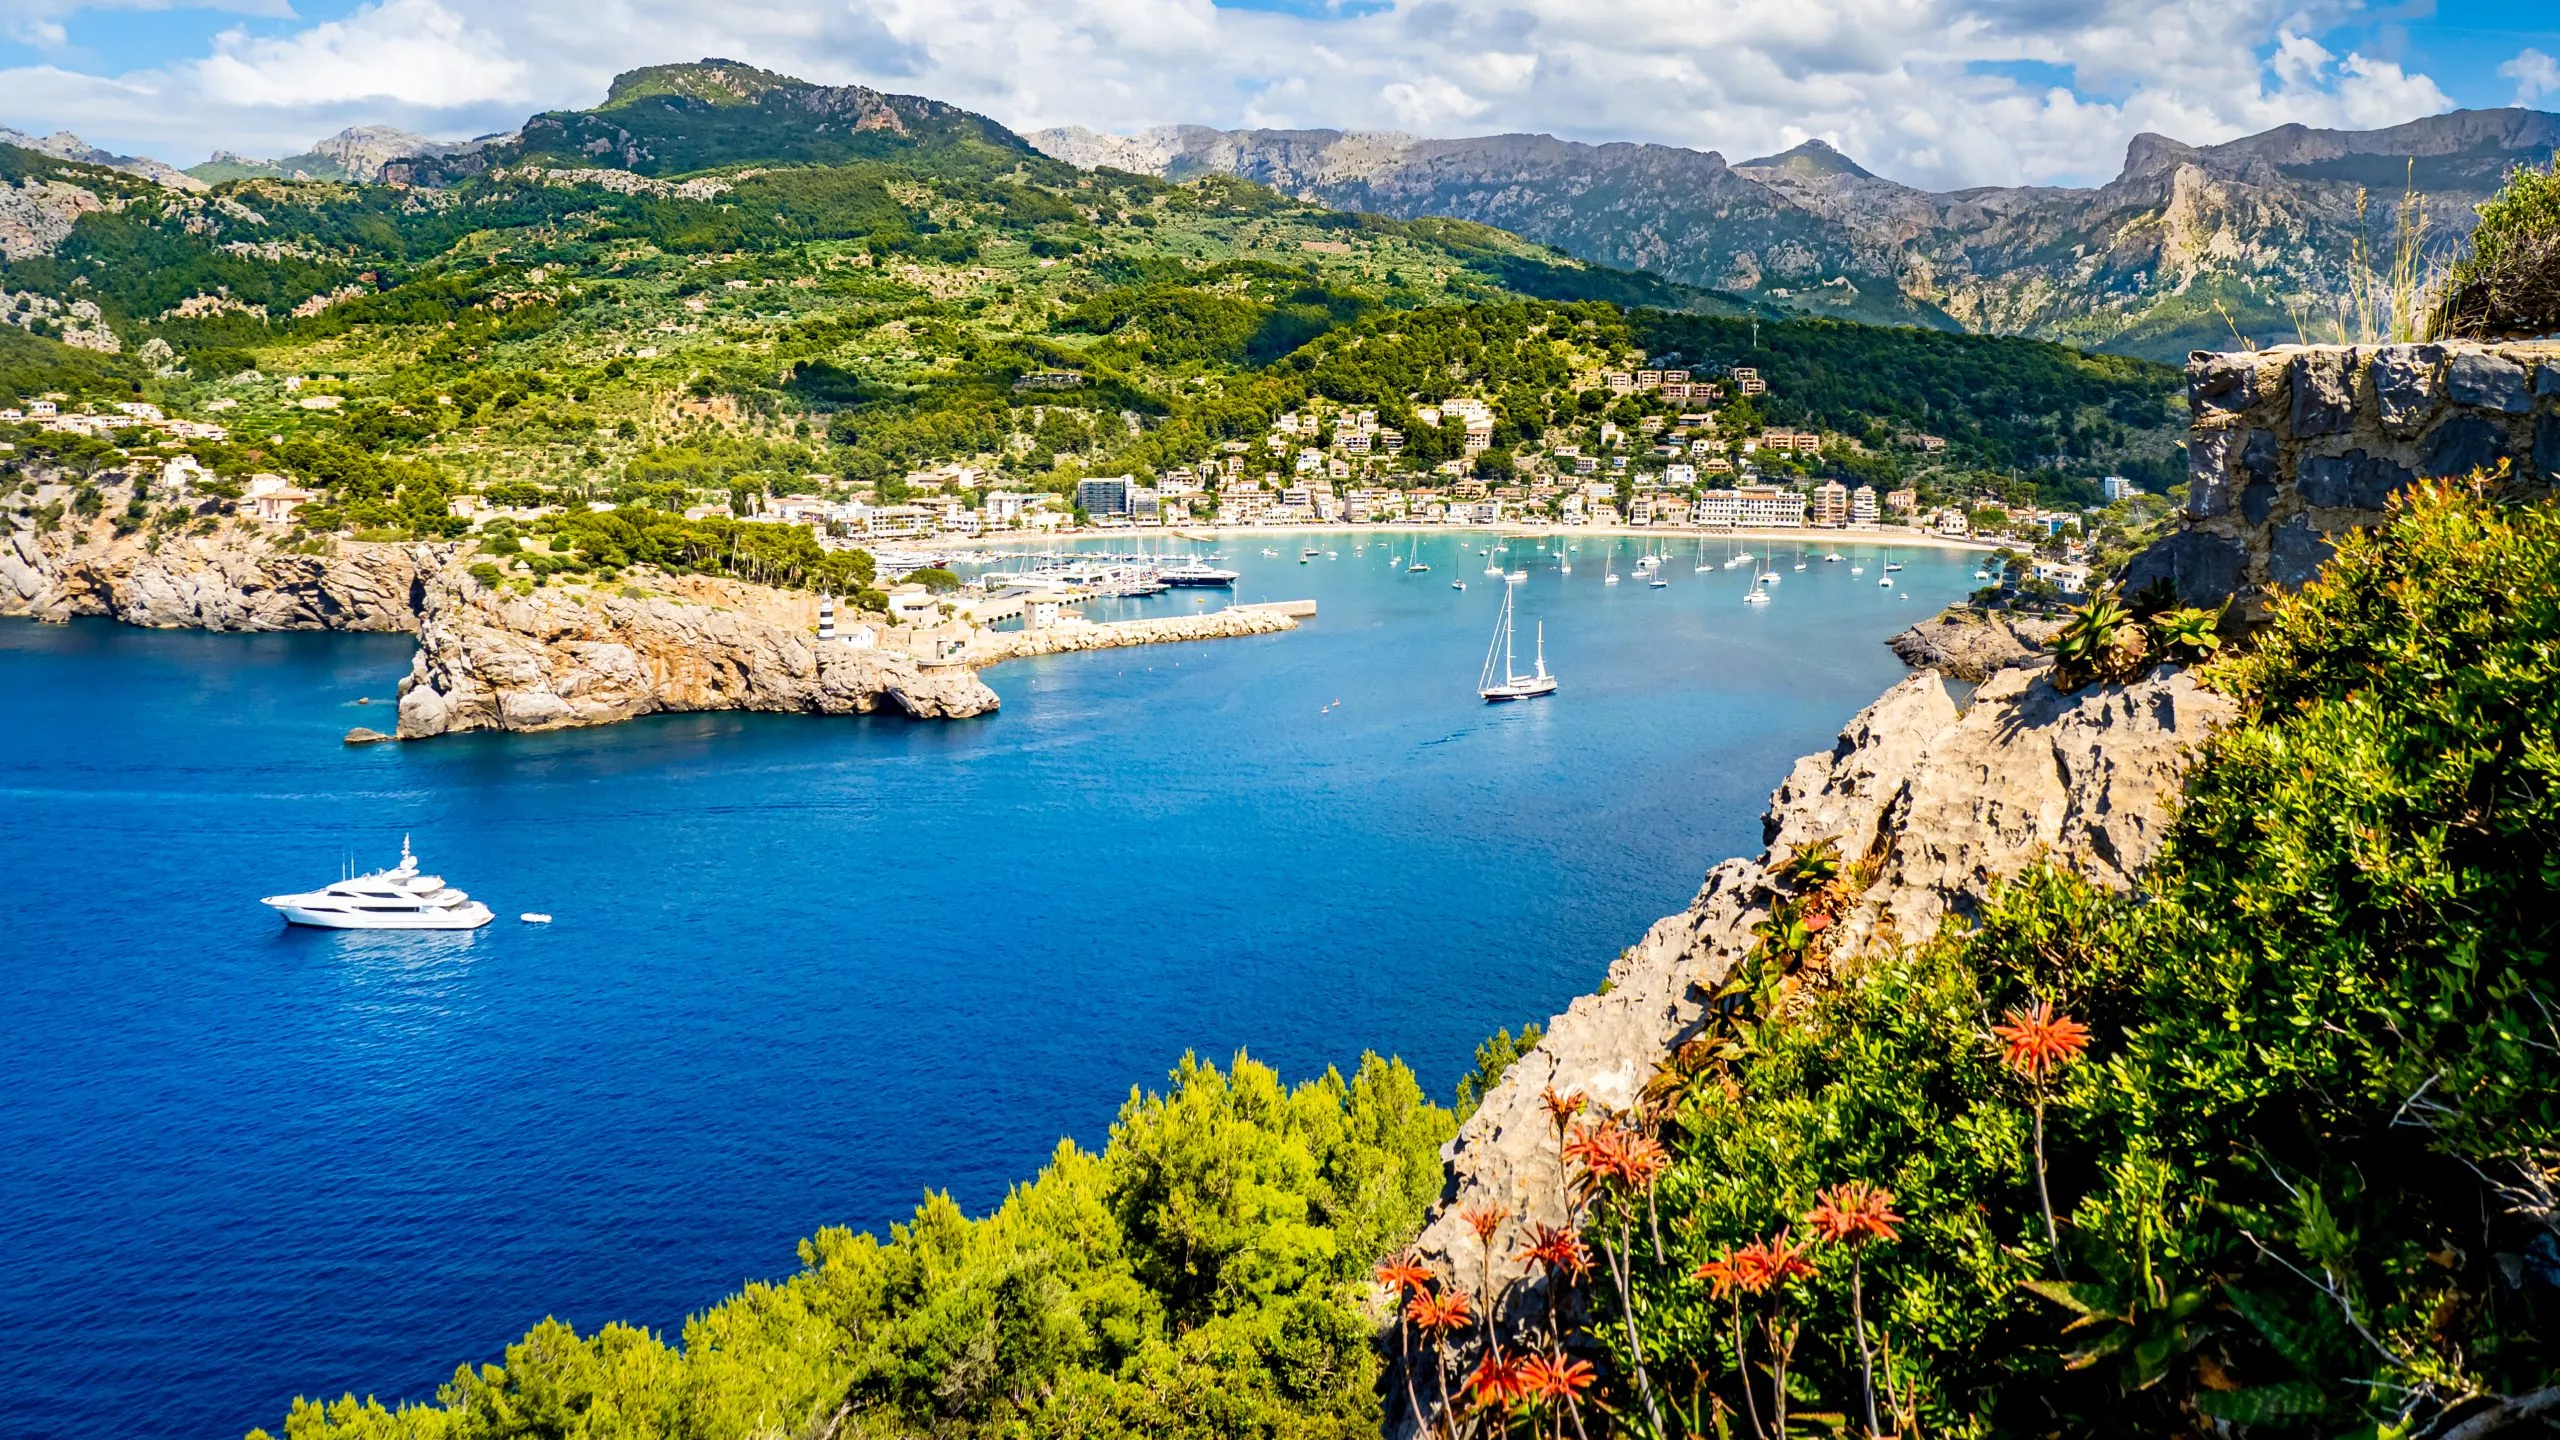 Panorama of Port Soller Mallorca with mountain peak Puig de la Bassa, marina Tramontana, beaches Platja de Can Generos and Platja des Traves from left to right with boulder and flowers in foreground.